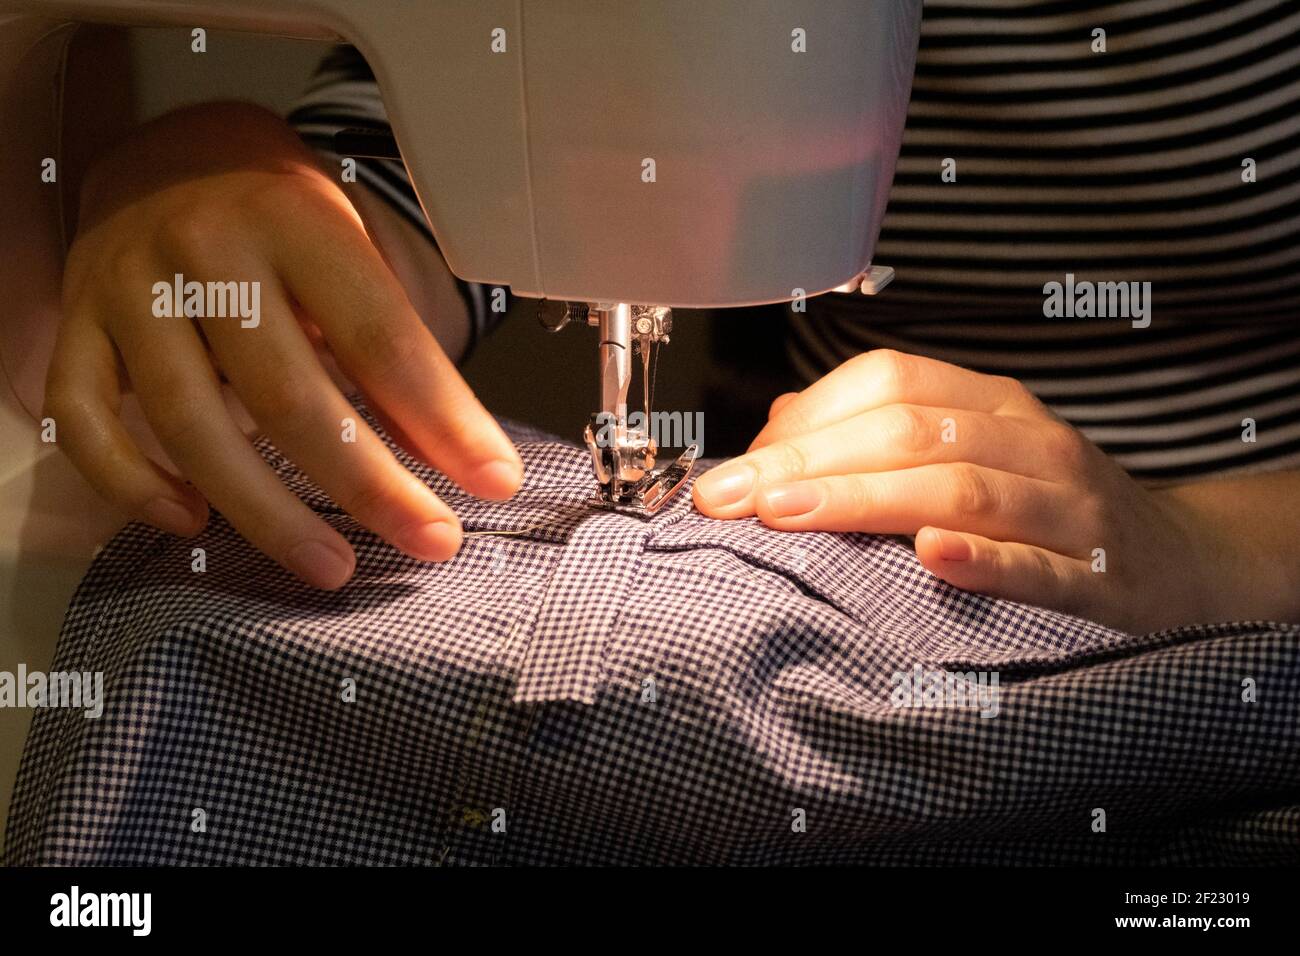 Using her own sewing machine, a young dressmaking hobbyist woman sews together the seams of a home-made dress that she's created from a pattern in her home, on 6th March 2021, in London, England. Stock Photo